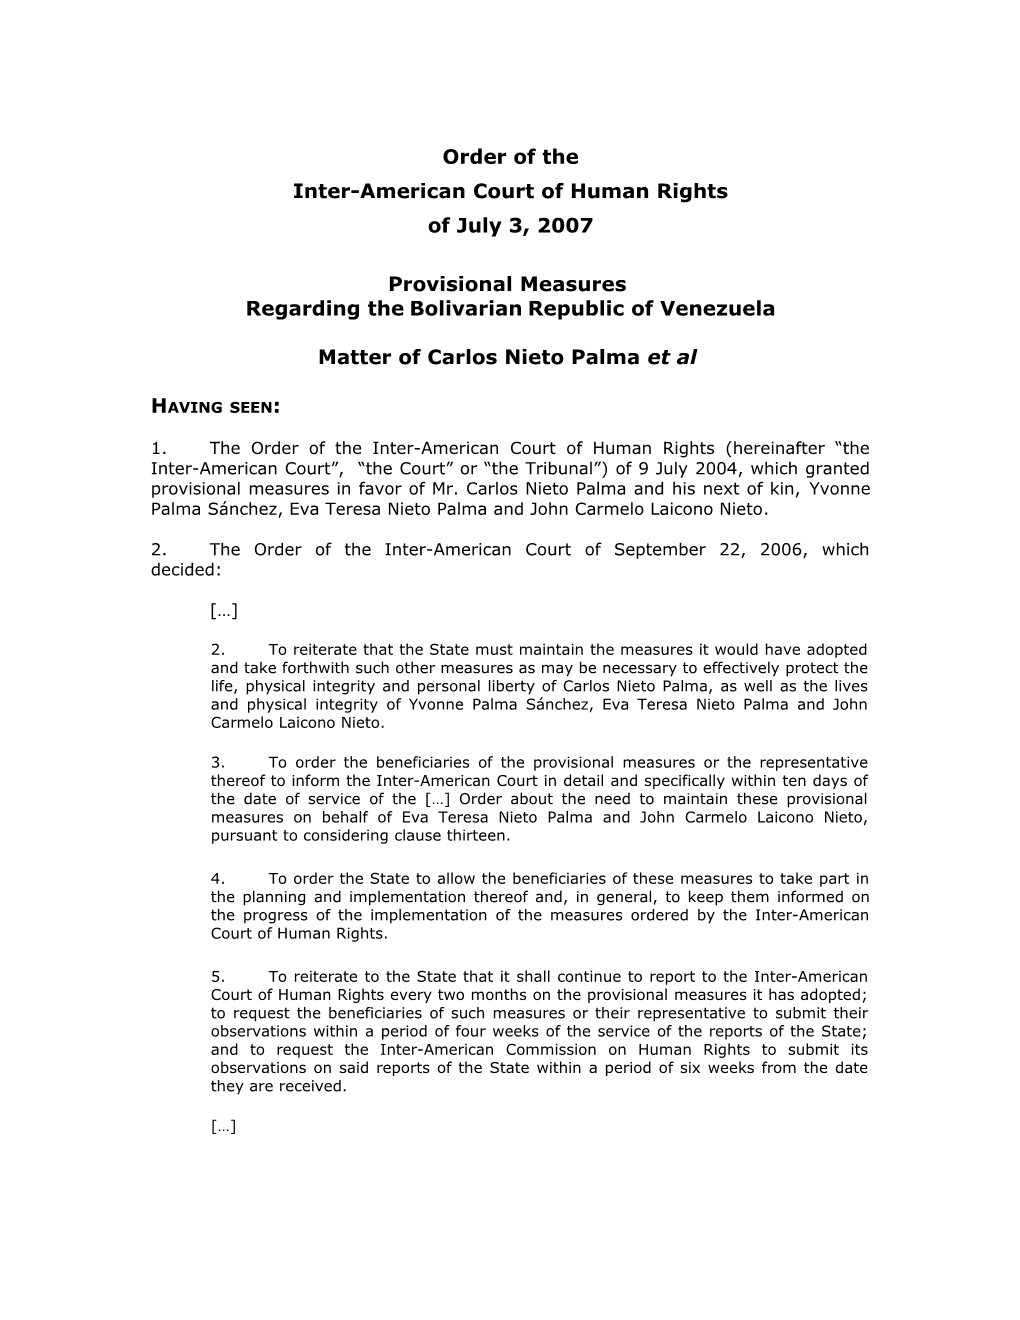 Inter-American Court of Human Rights s33